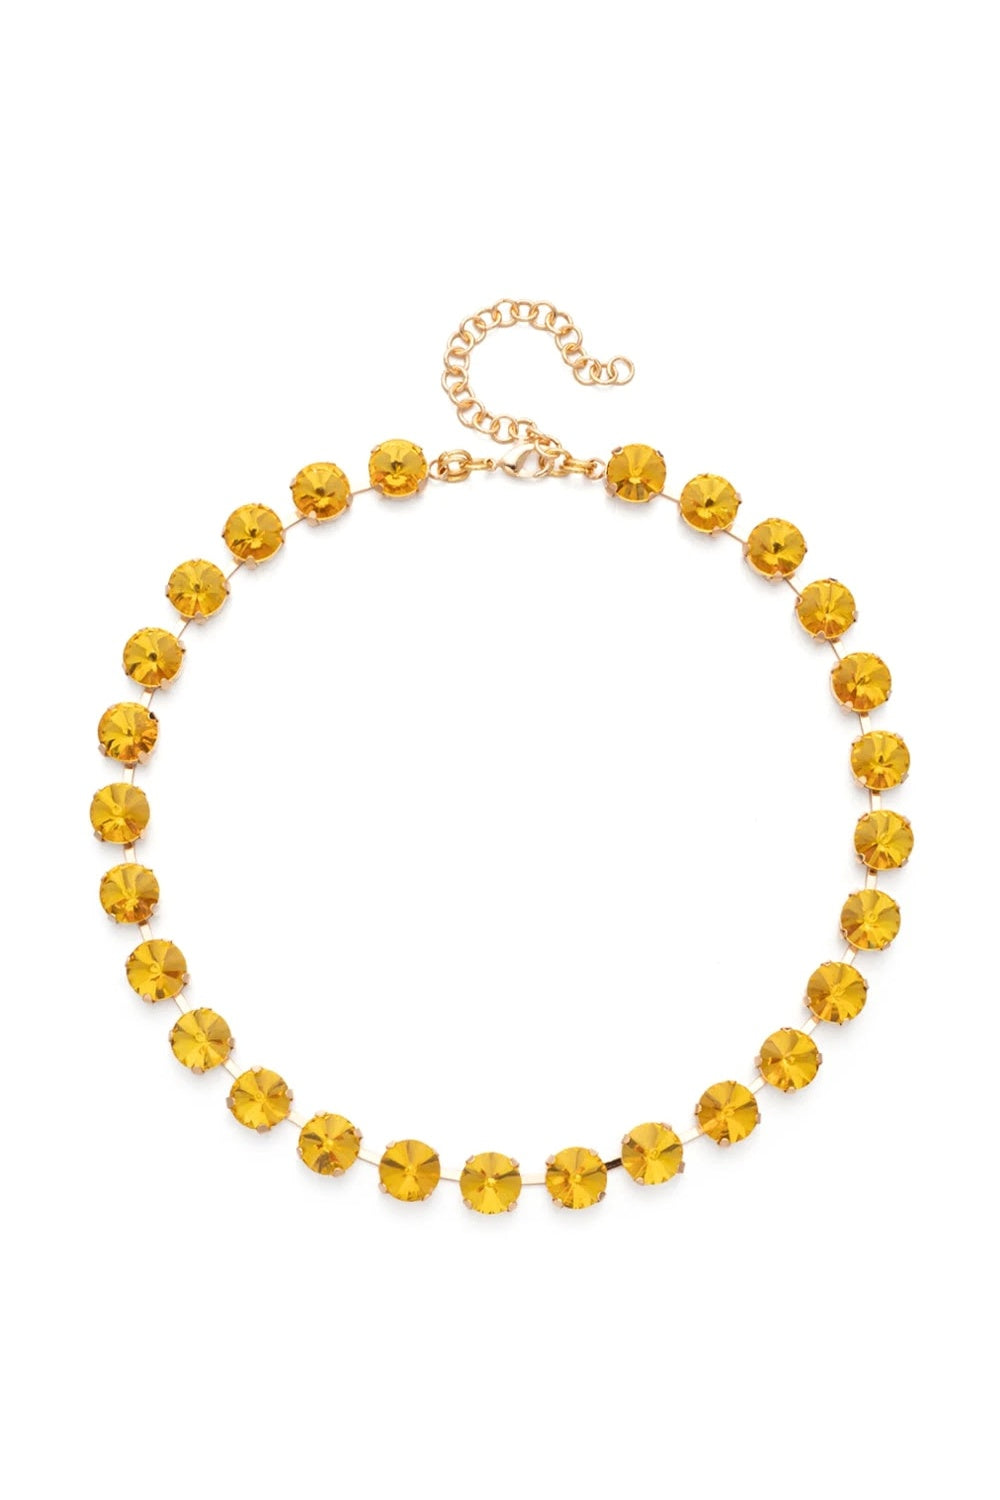 FIRST MONDAY IN MAY NECKLACE MINI LEMON